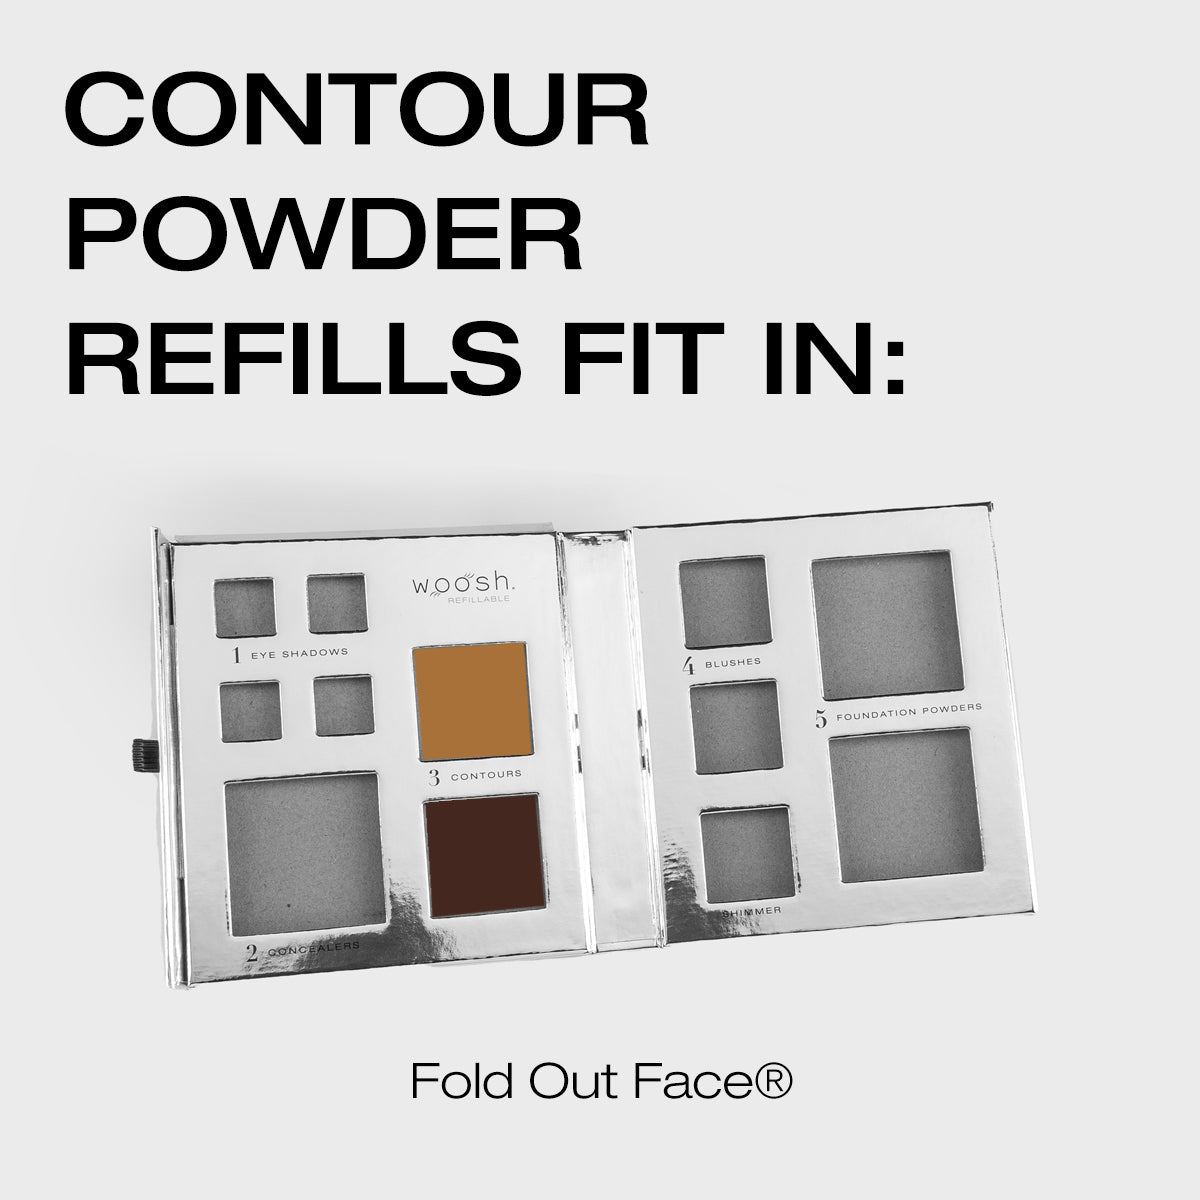 Demo of how the contour powder refill fits in the fold out face